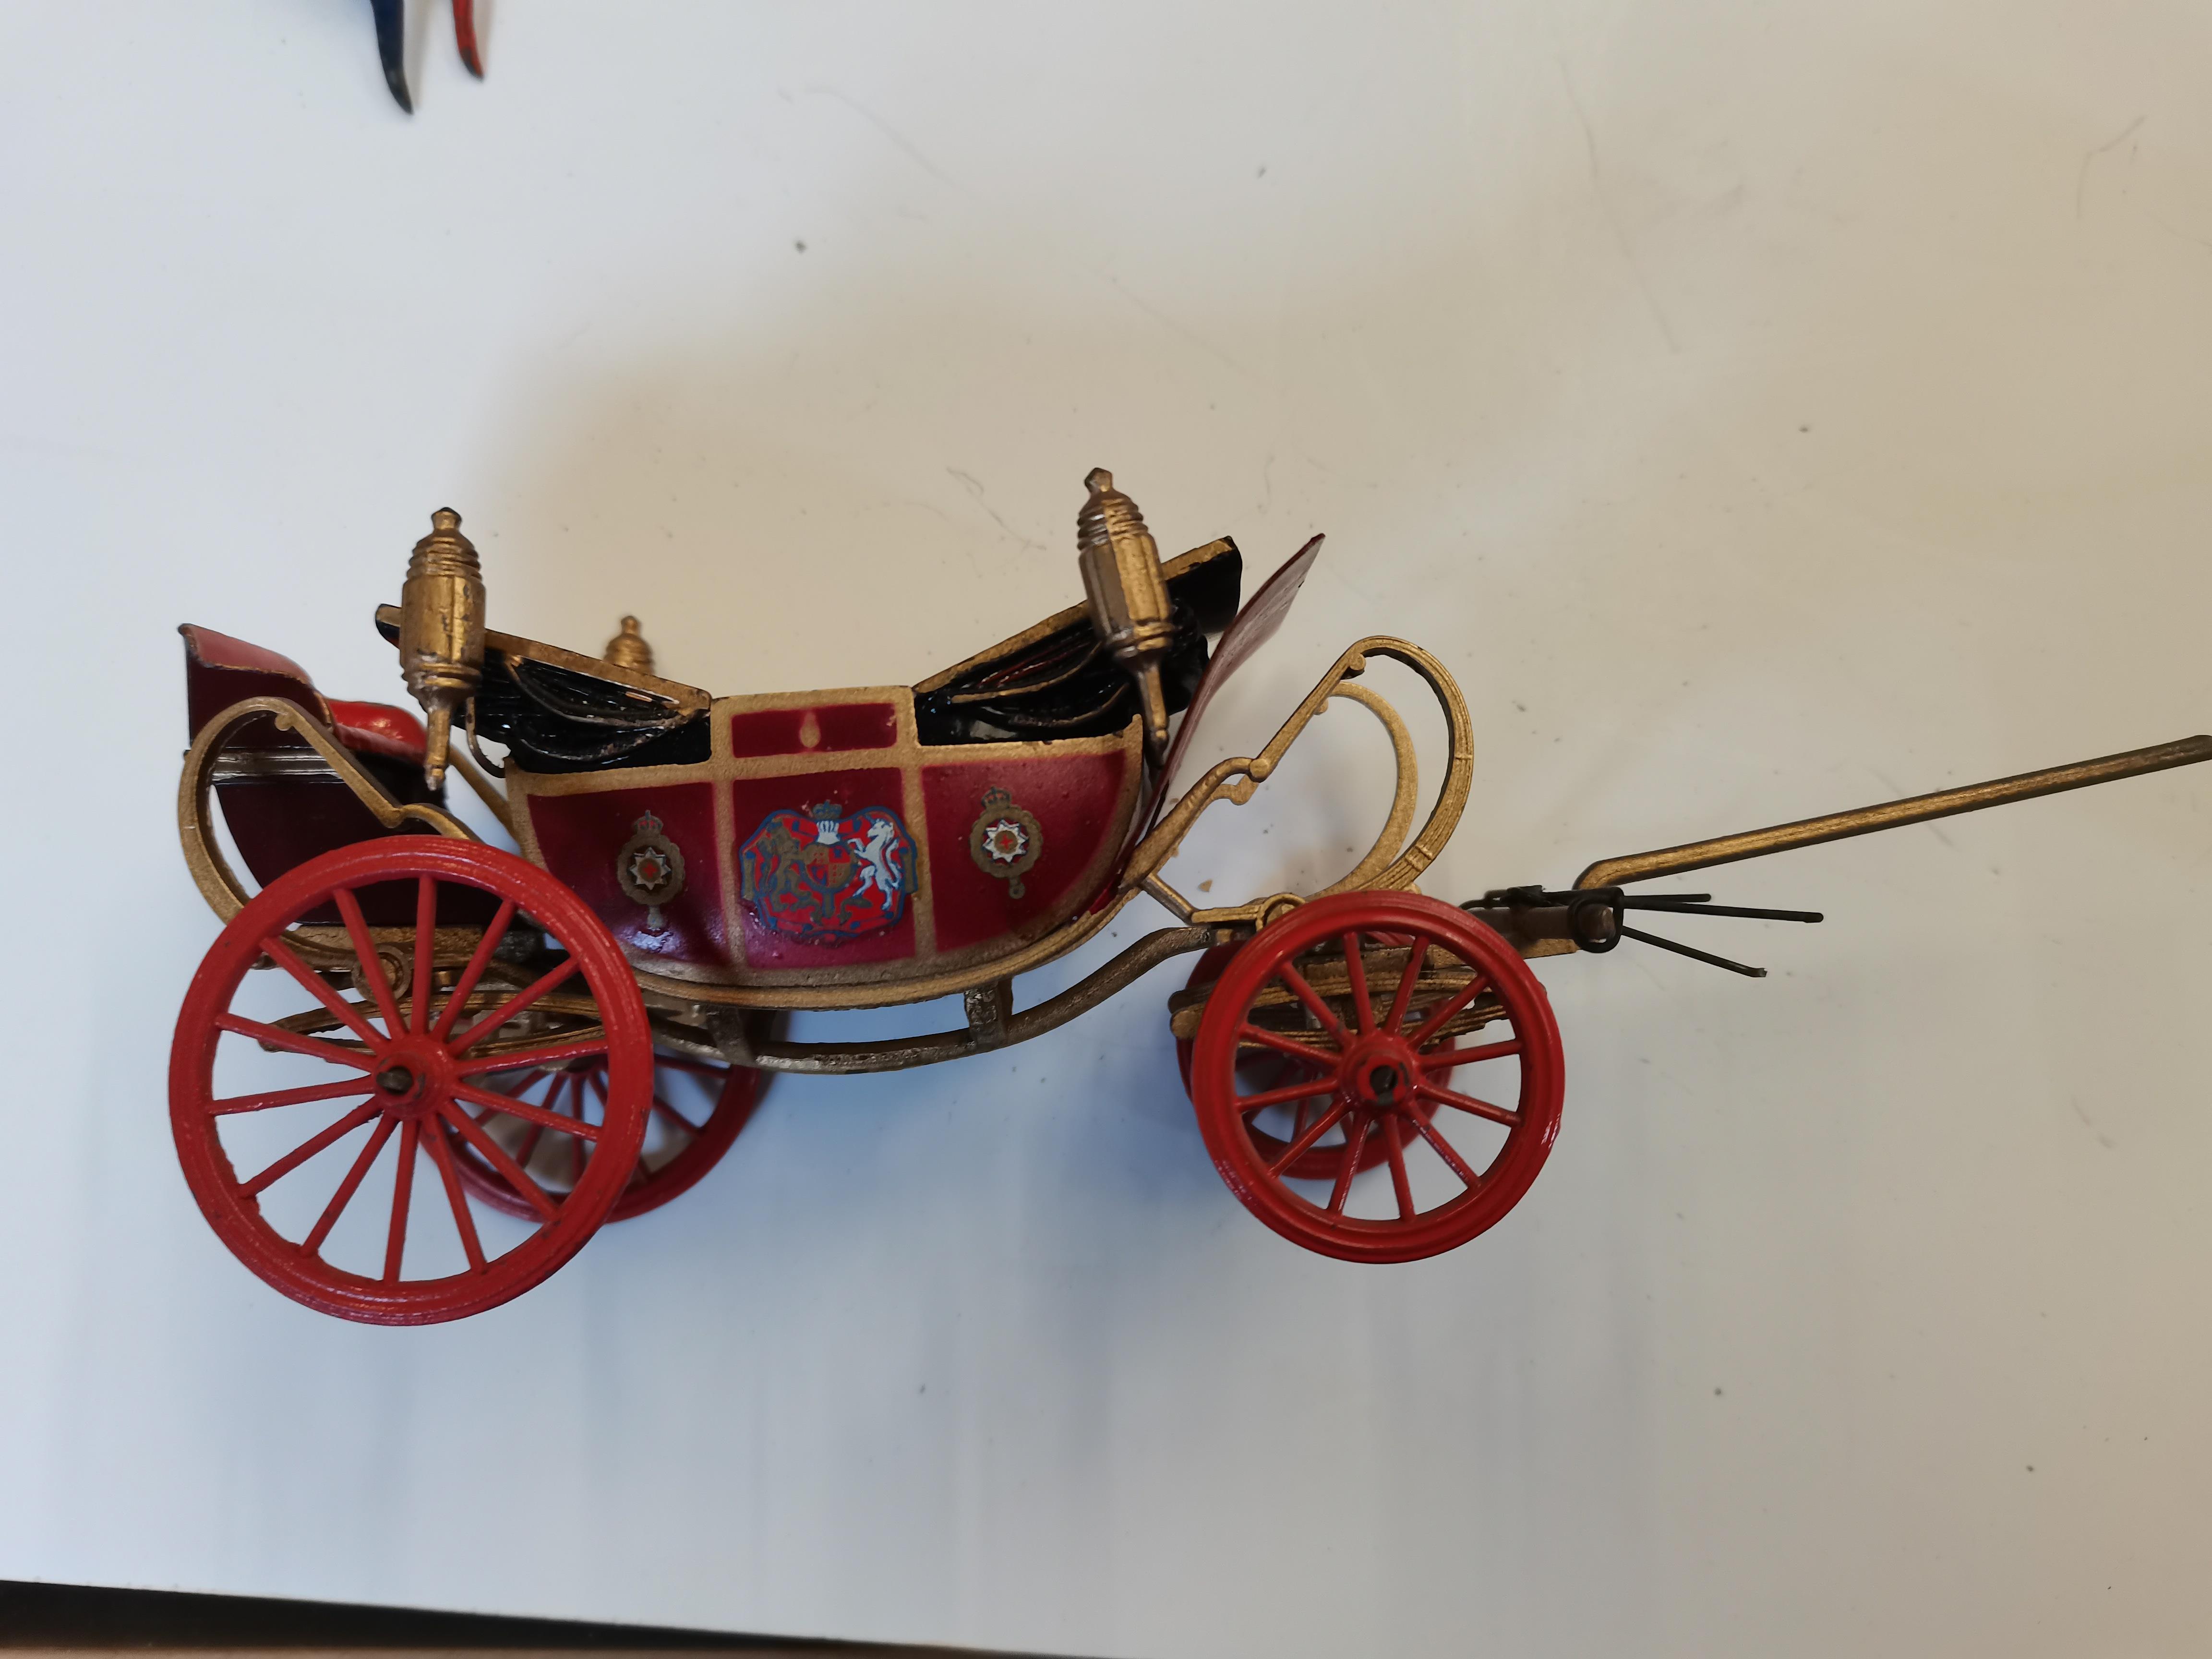 x2 boxed Royal Carriages "Britains Historical Series" and metal toys - animals, petrol pumps, etc BY - Image 7 of 13